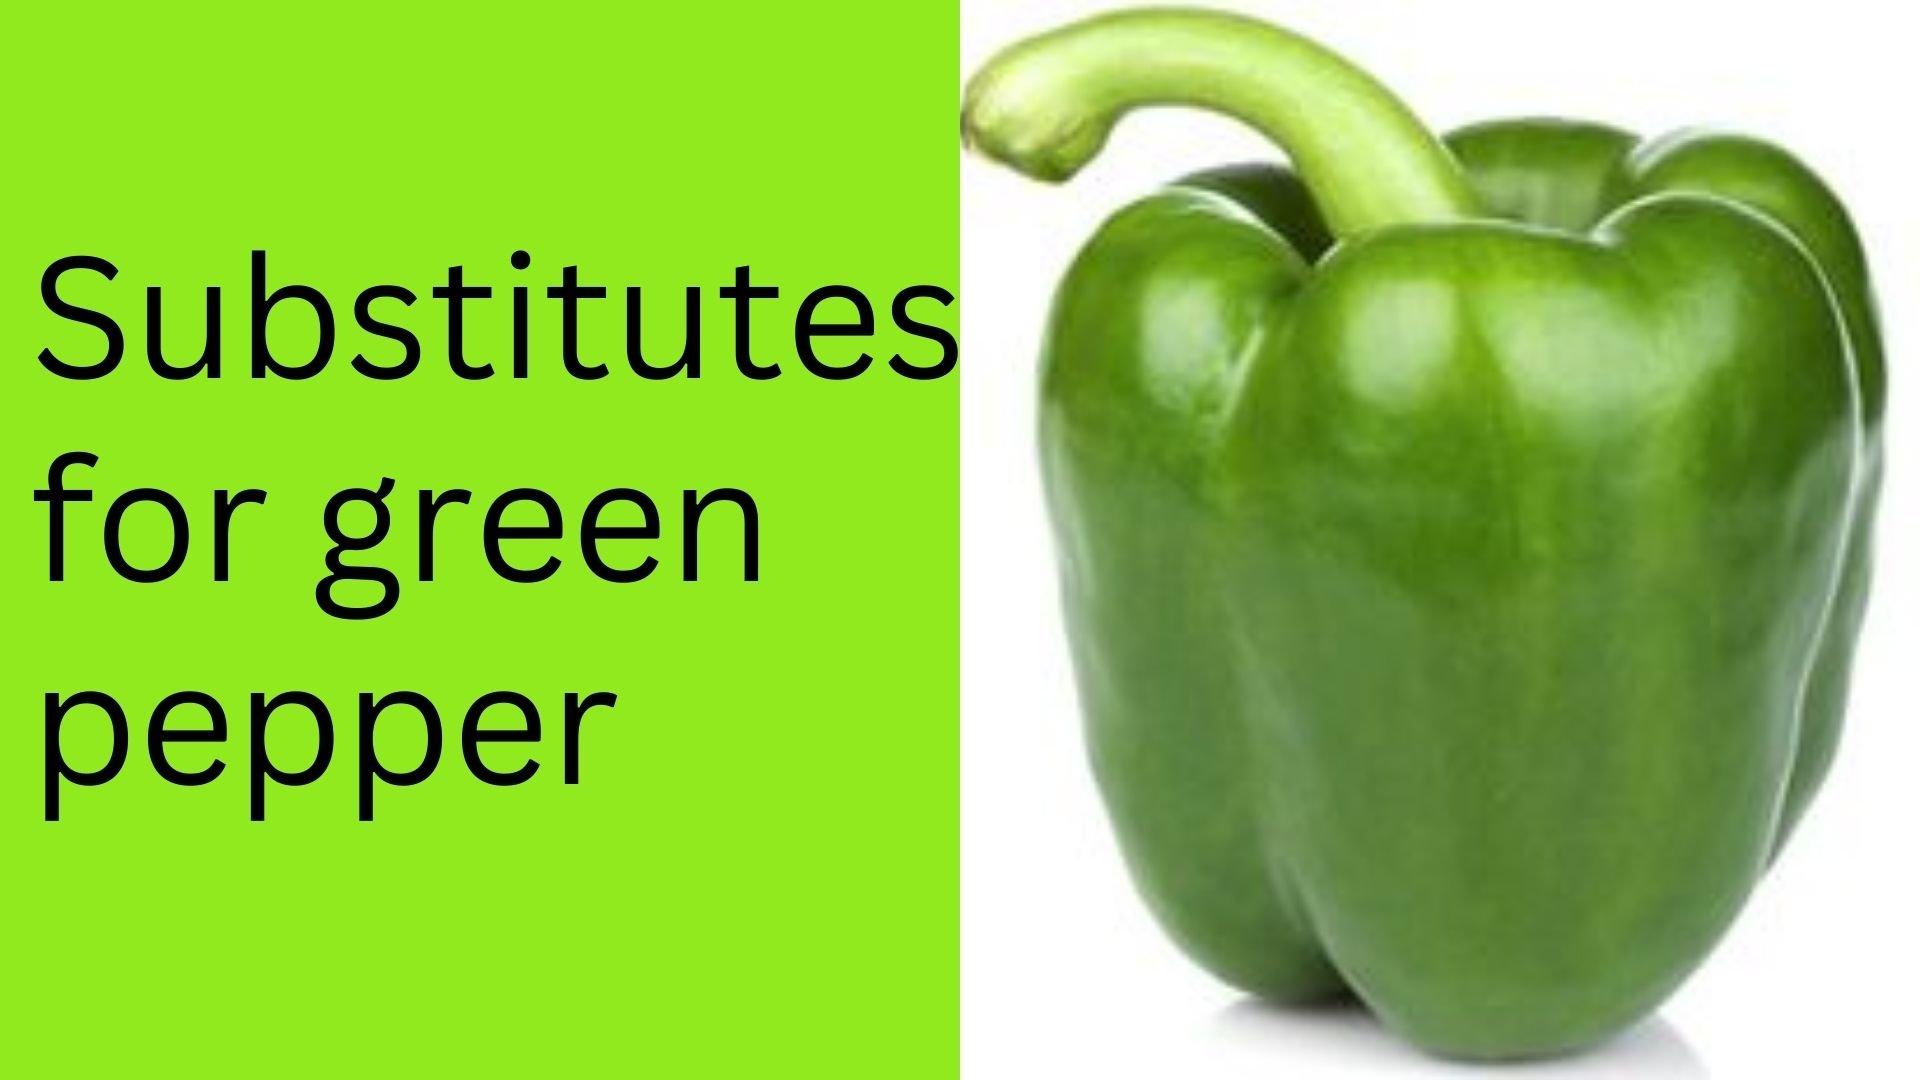 Substitutes for green pepper